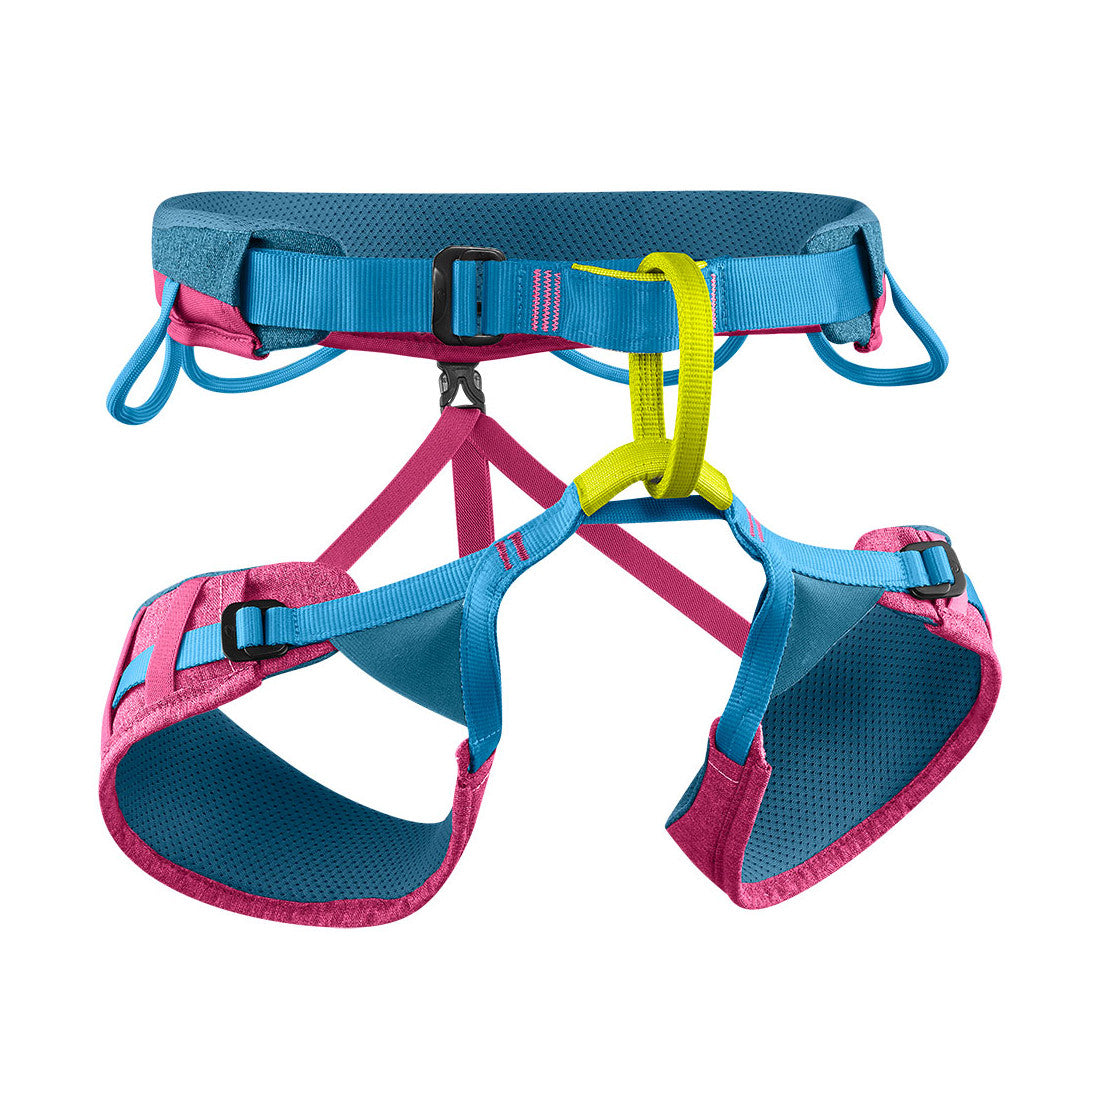 Edelrid Jayne III climbing Harness, front/side view in blue, pink and yellow colours